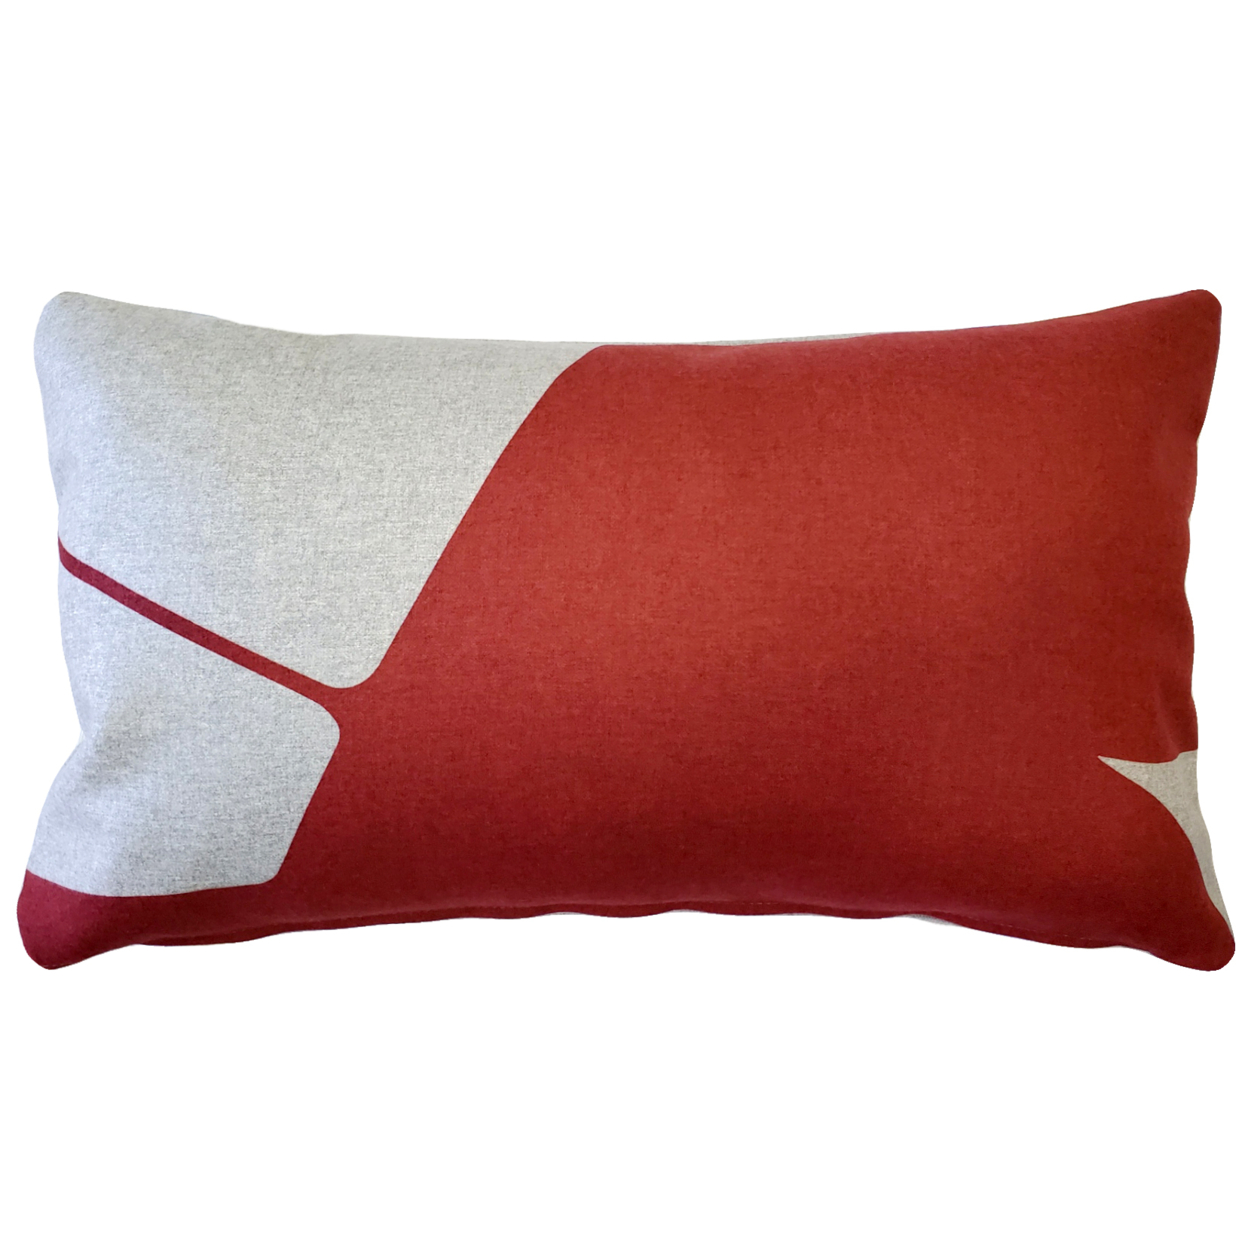 Boketto Spanish Red Throw Pillow 12x19 Inches Square, Complete Pillow With Polyfill Pillow Insert